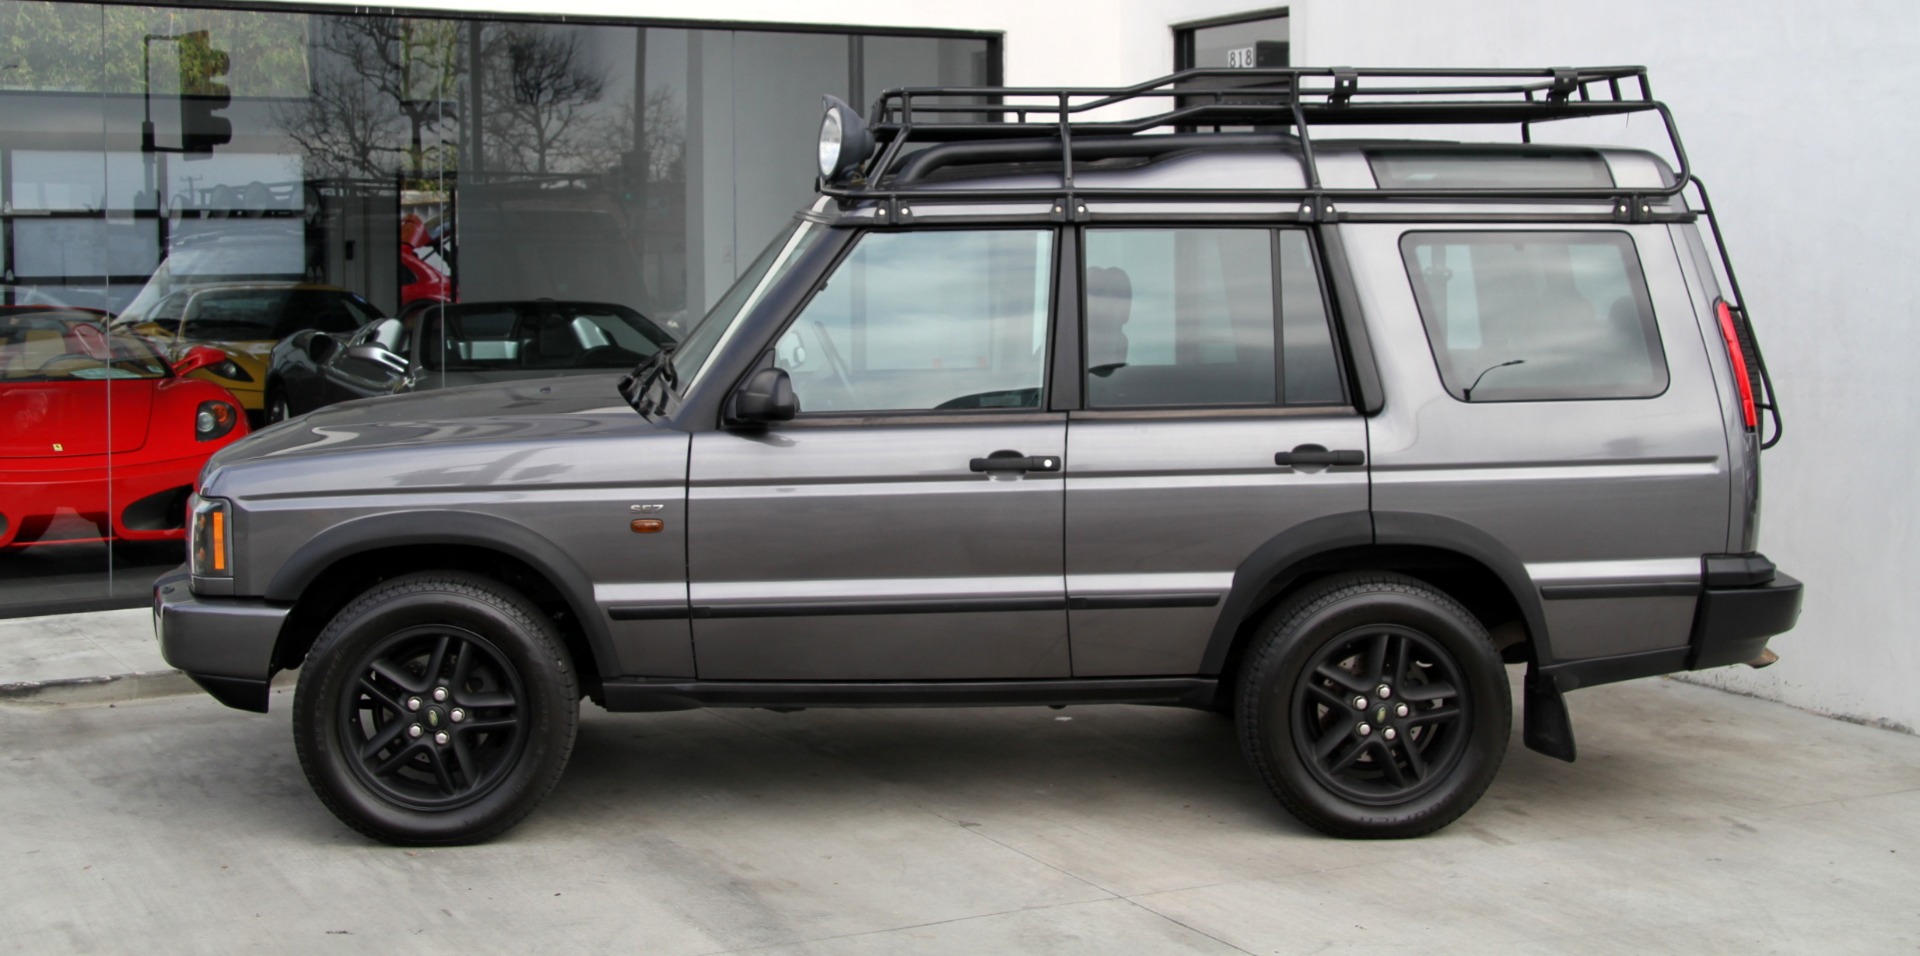 Top 100+ images land rover discovery ii roof rack - In.thptnganamst.edu.vn